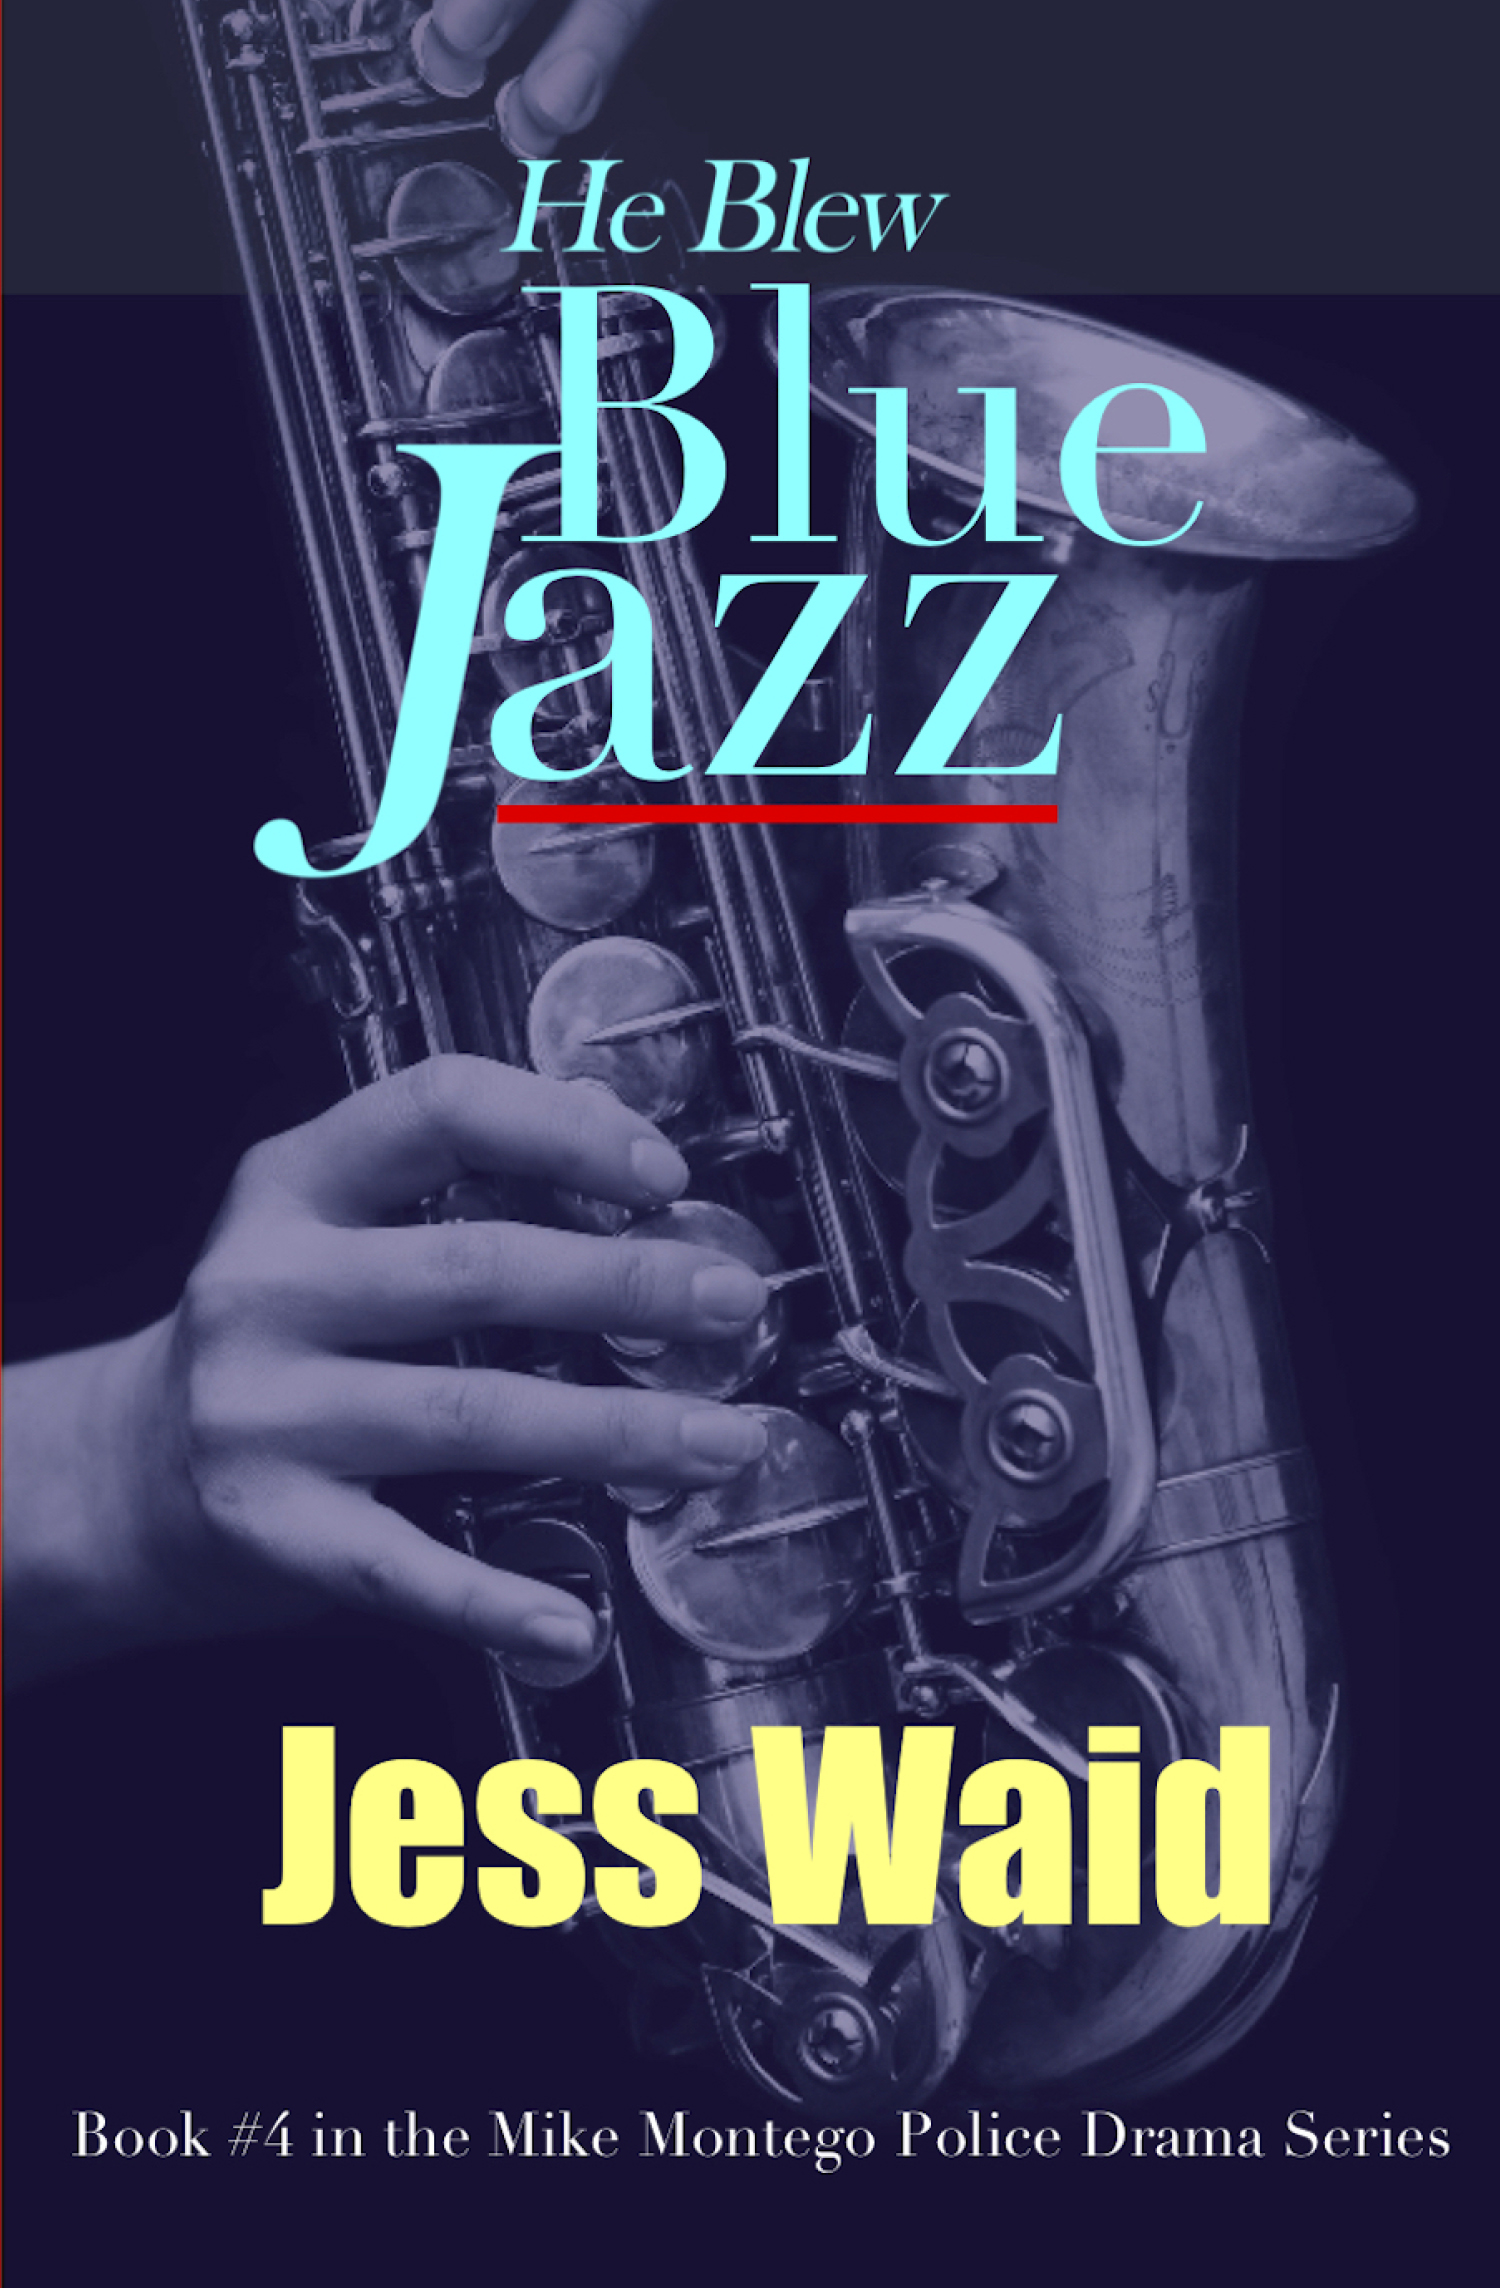 He Blew Blue Jazz (Book #4 in the Mike Montego Police Drama Series) Image